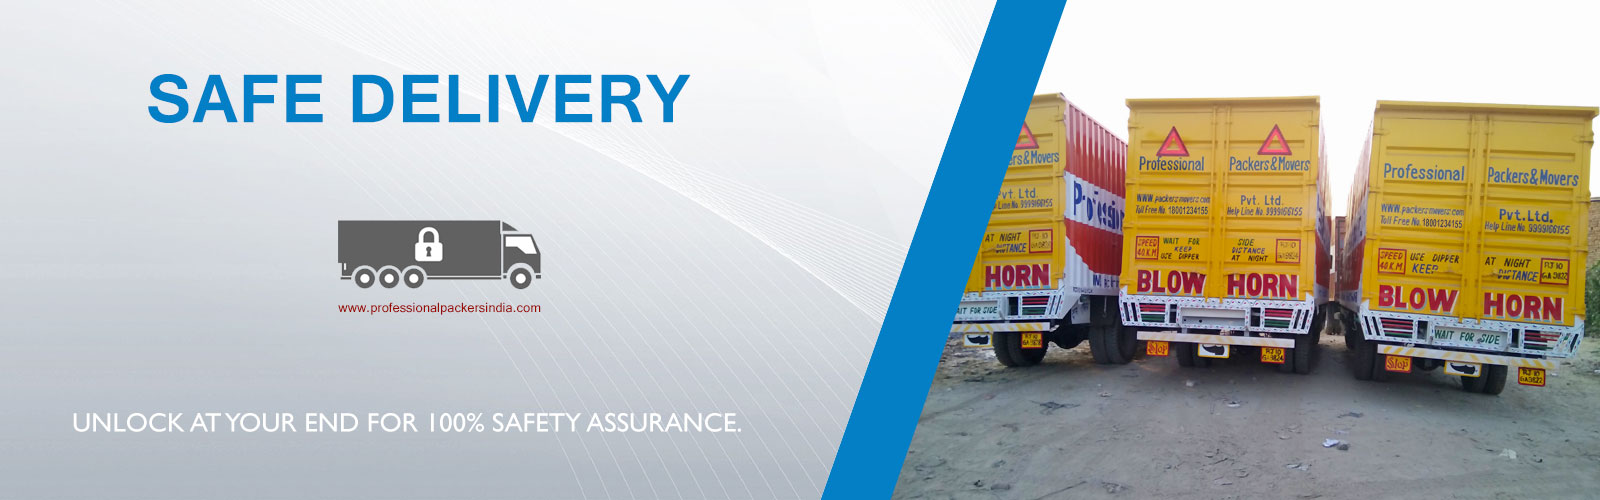 Movers Packers Gulmohar Park Delhi company move your belongings fast and in an efficient manner by integrating top-notch packaging material, dedicated staff and global-class technology.